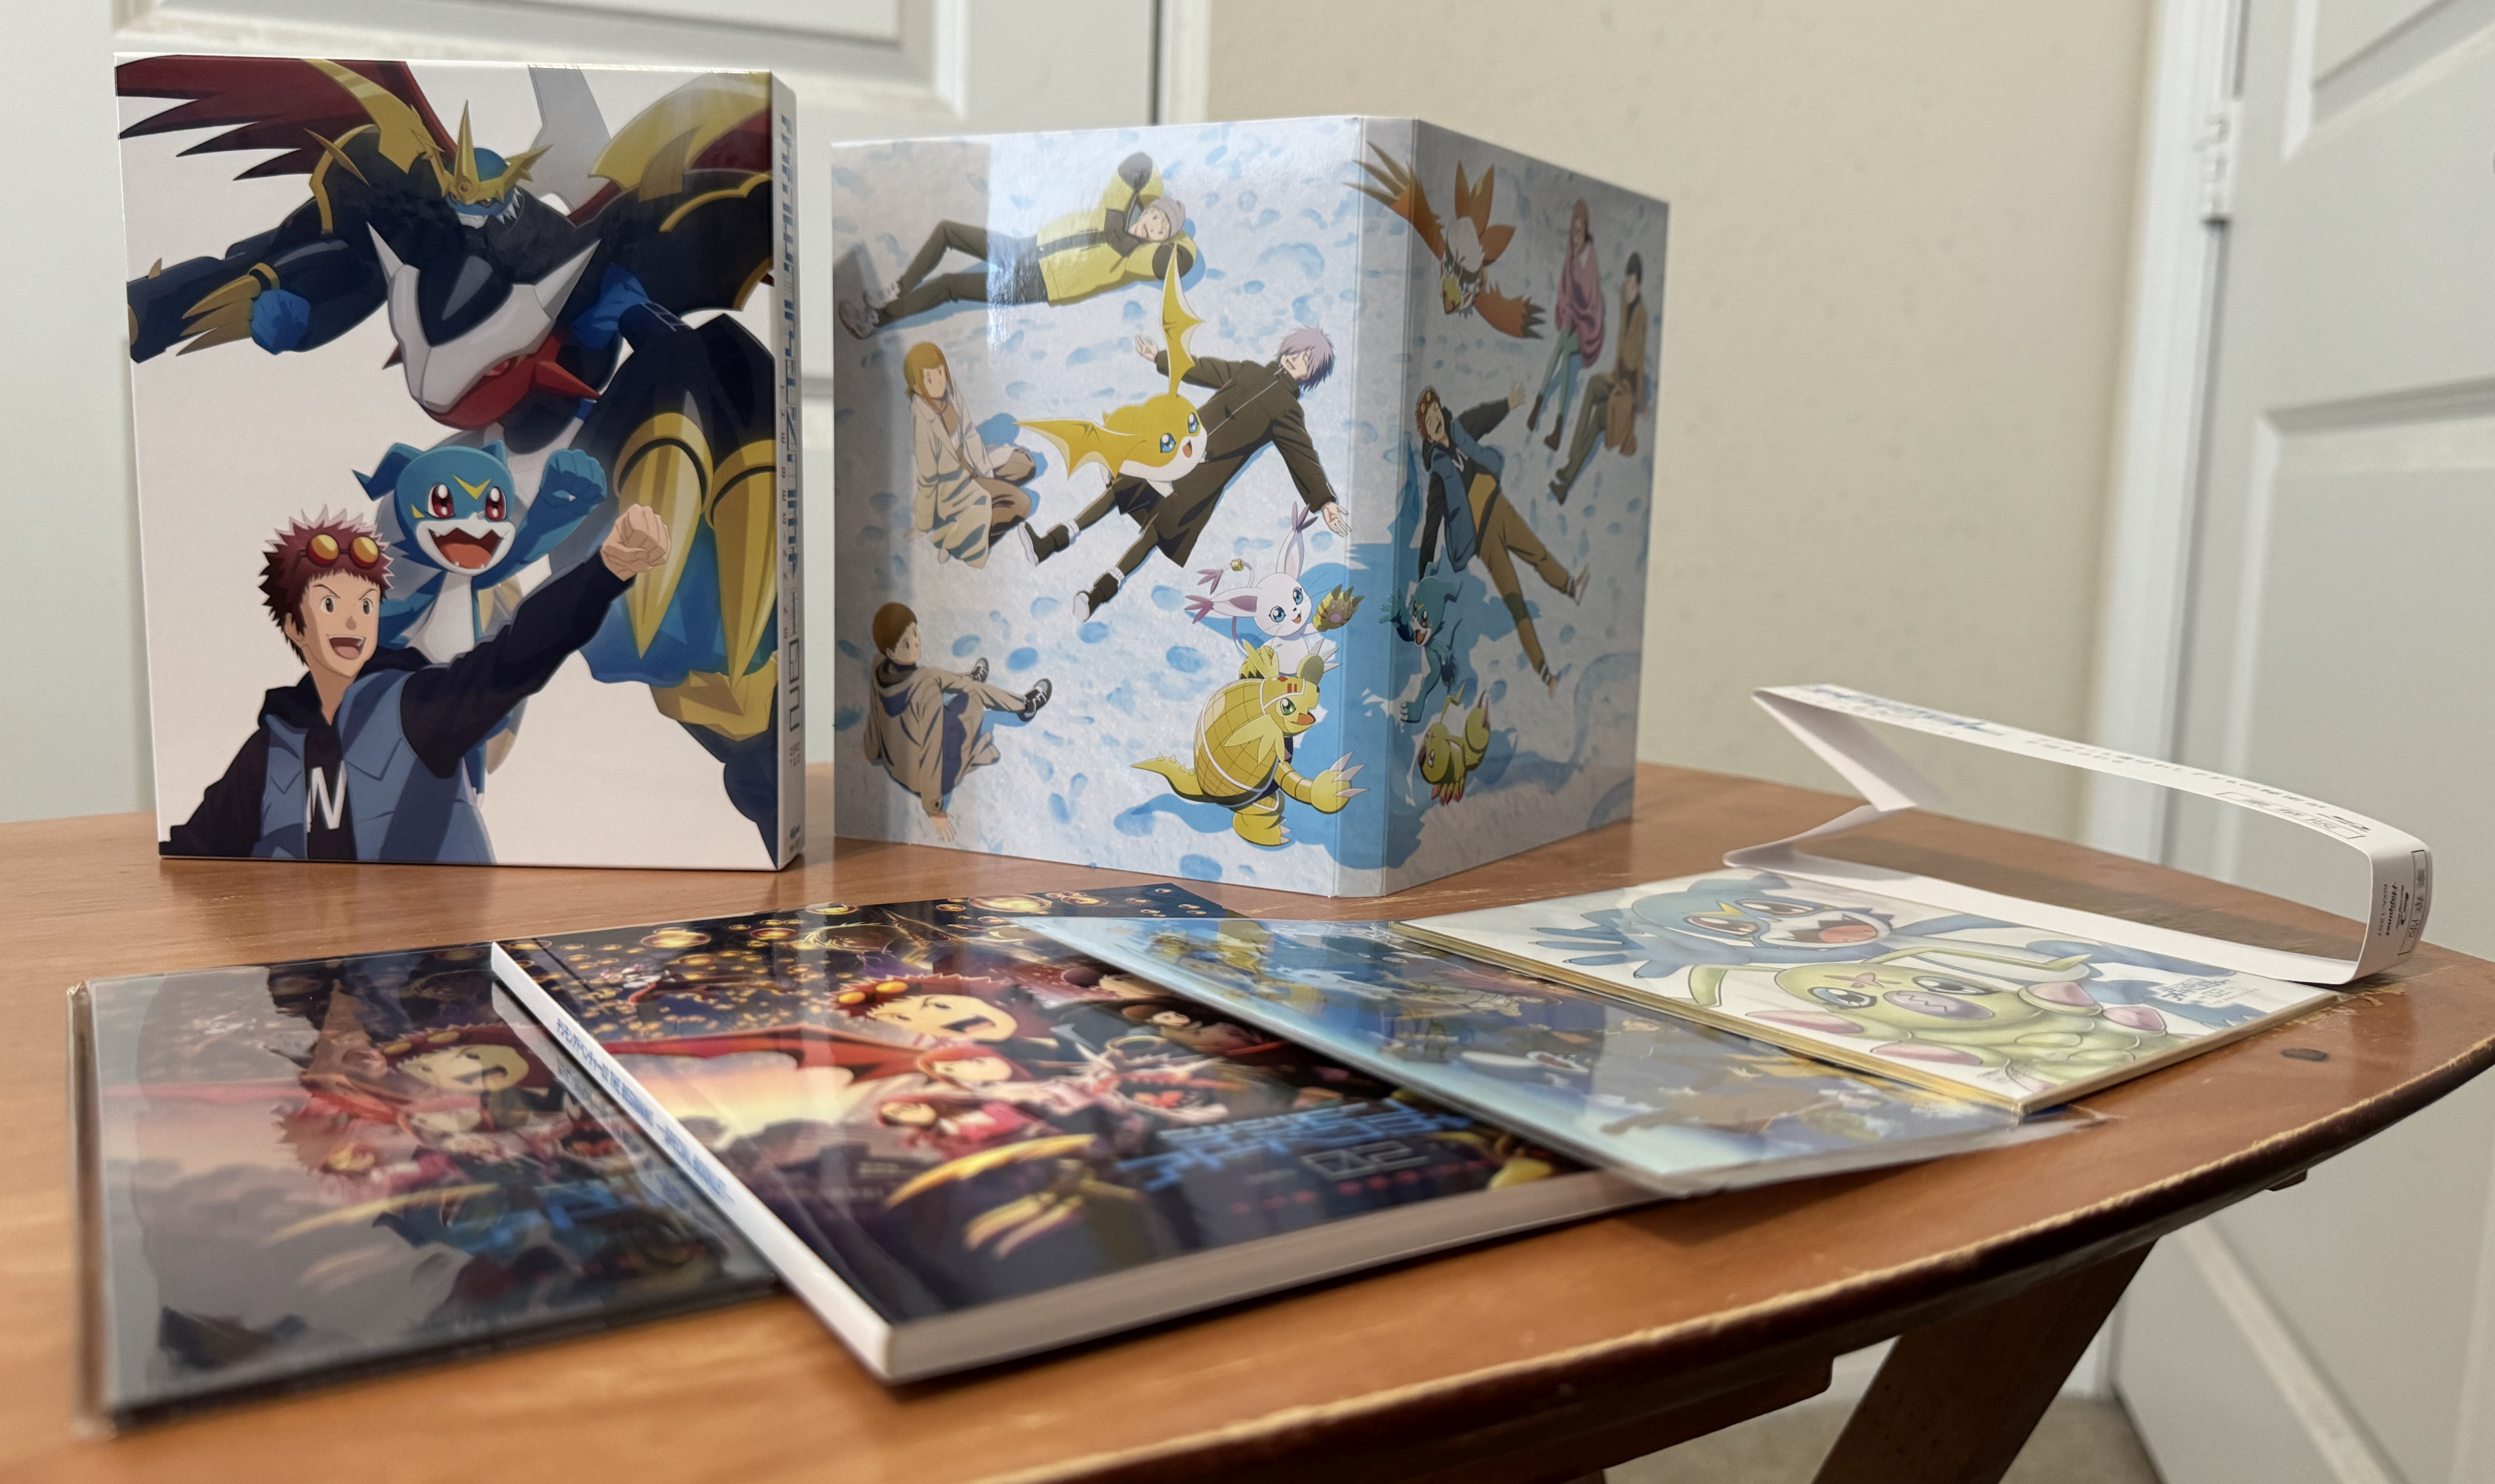 Digimon Adventure 02: The Beginning is out on Blu-ray (Deluxe 